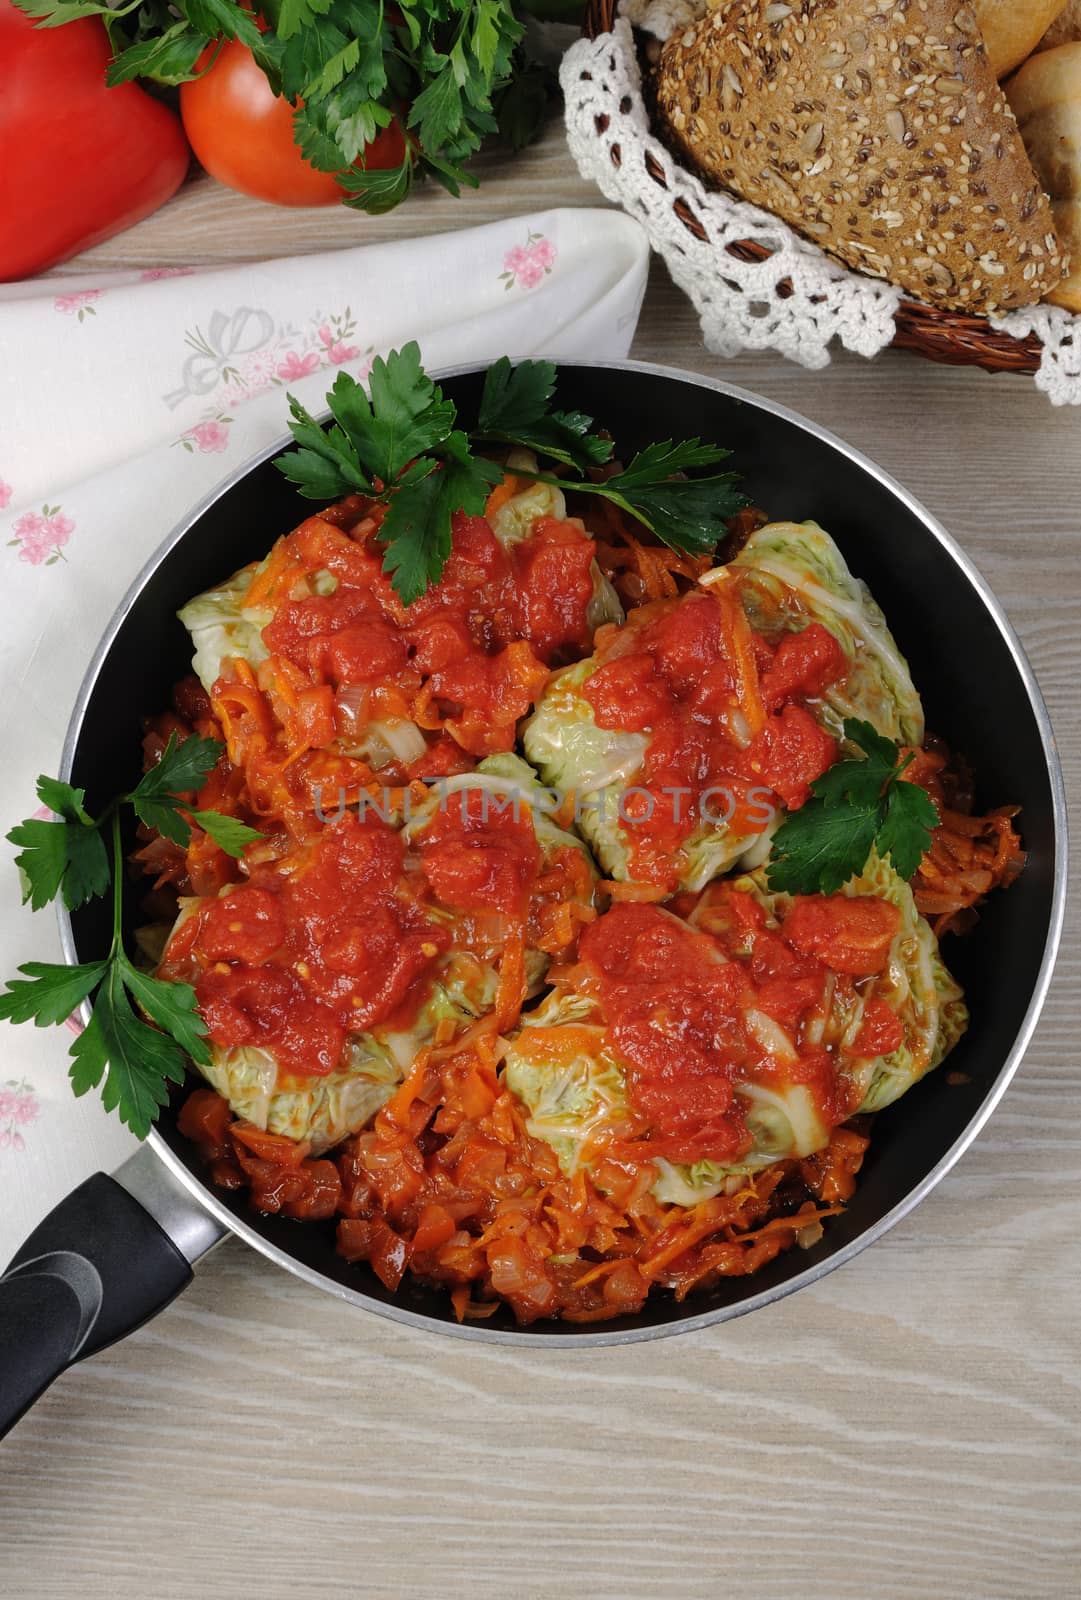 stuffed savoy cabbage by Apolonia